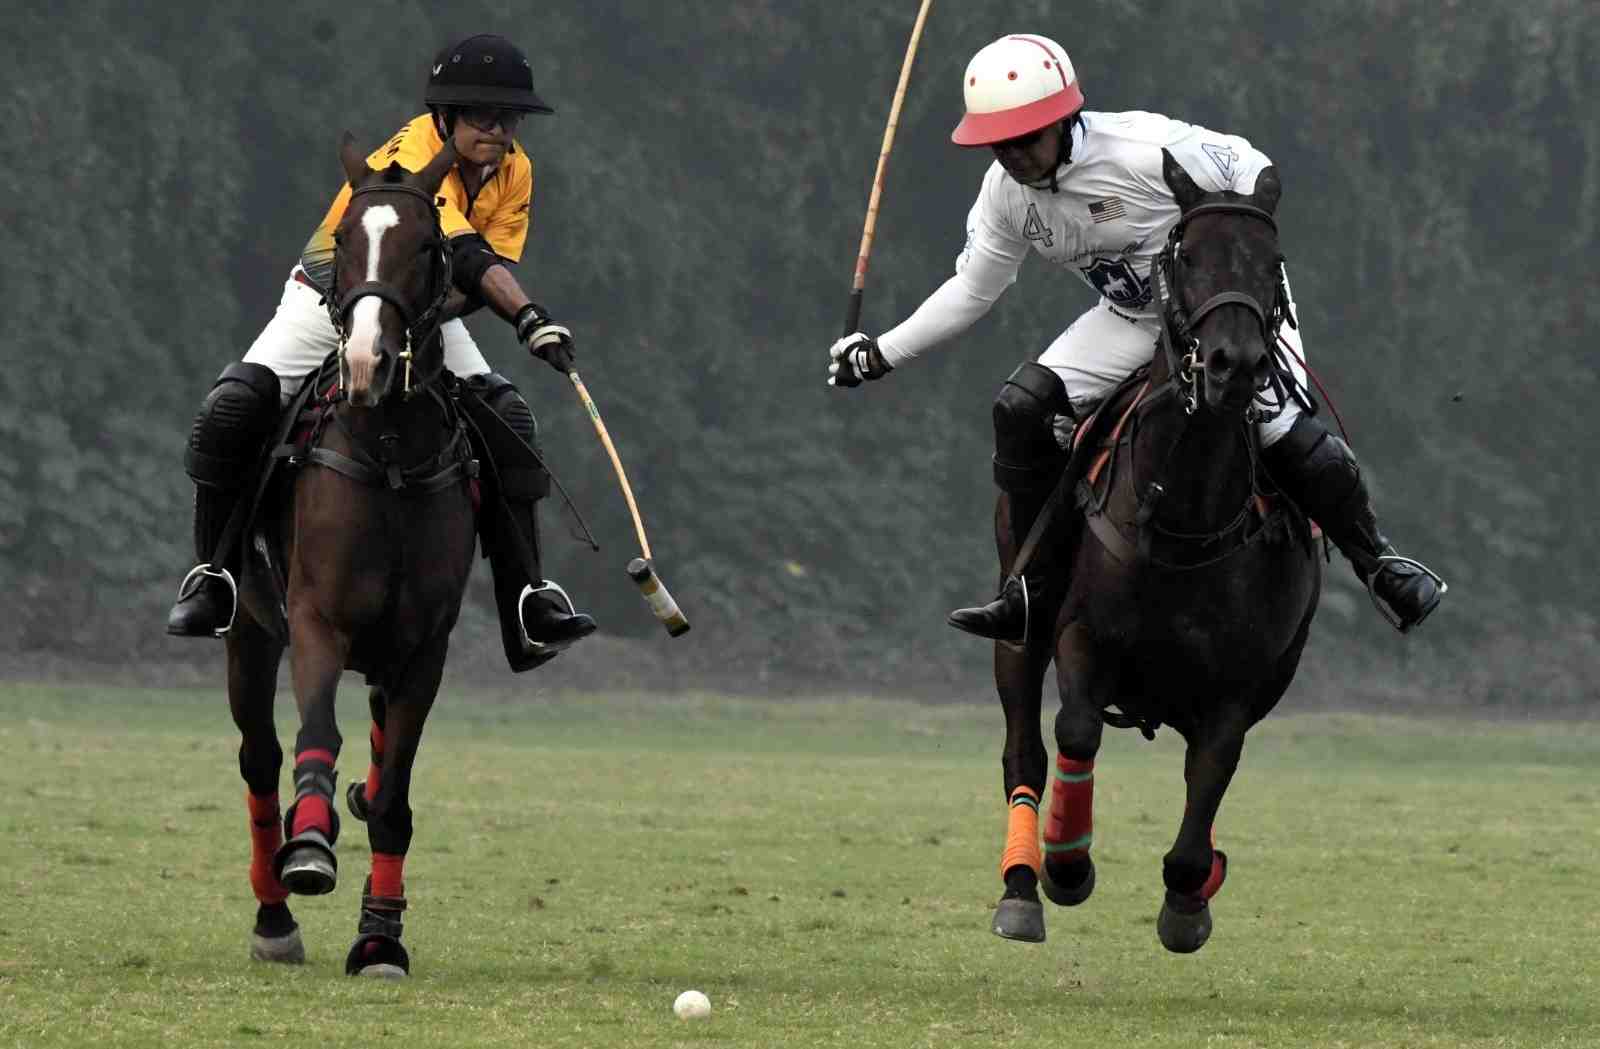 Exhibition polo match: Lexington Club and Lahore Club play a 5-5 draw